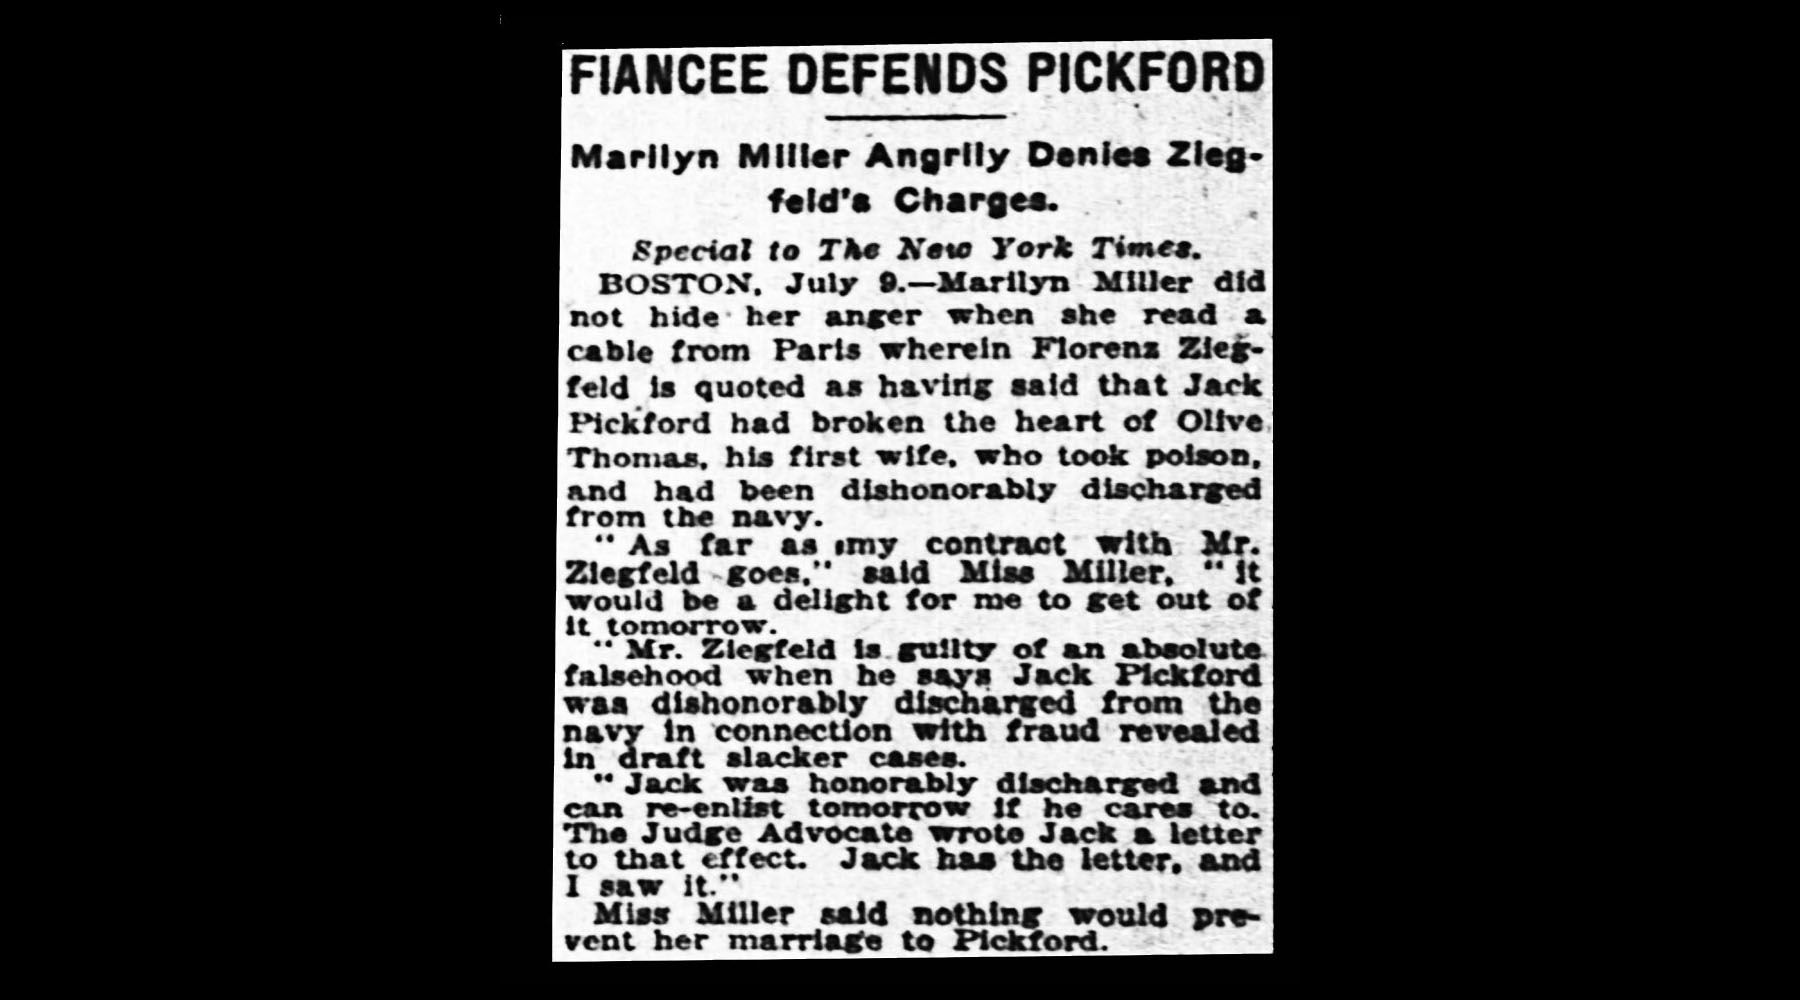 Marilyn publicly denies Florenz's claims about Jack and wants out of her contract with him. The marriage only lasts five years.